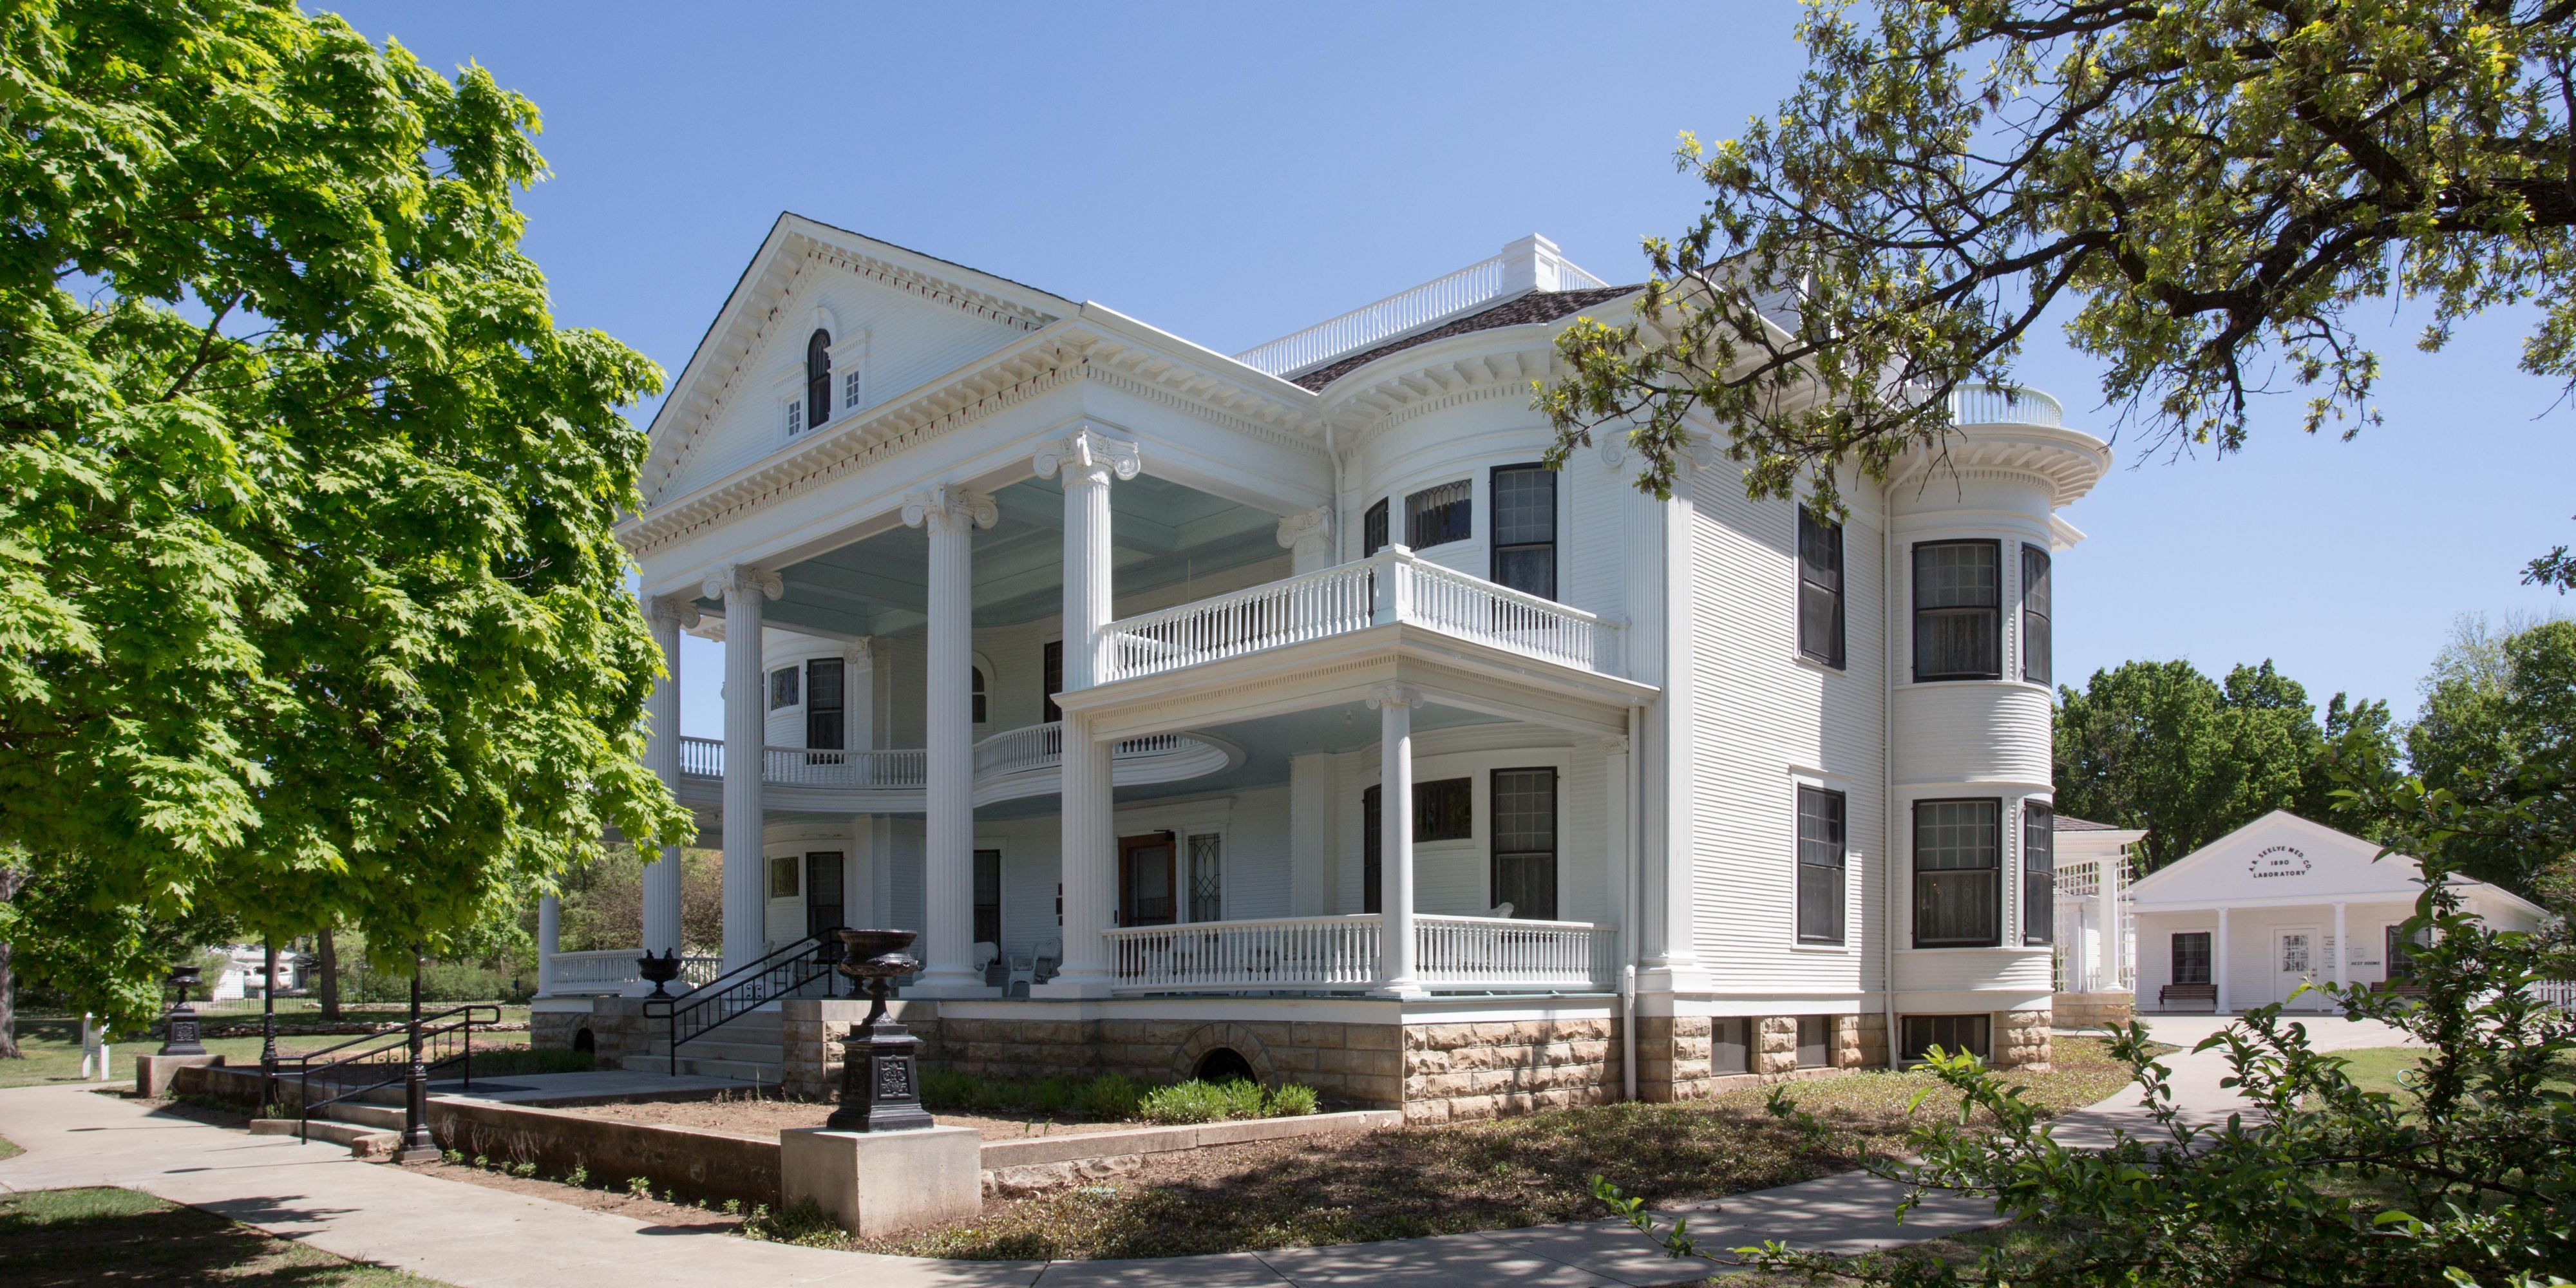 Take a tour of the Seelye Mansion while visiting Abilene! Built in 1905, and the home of Dr. A. B. Seelye, you don't want to miss this gorgeous walk through time!

Hours of Operation:
Monday-Saturday: 10am-4pm
Sunday: 1pm-4pm
With extended hours in the summer.